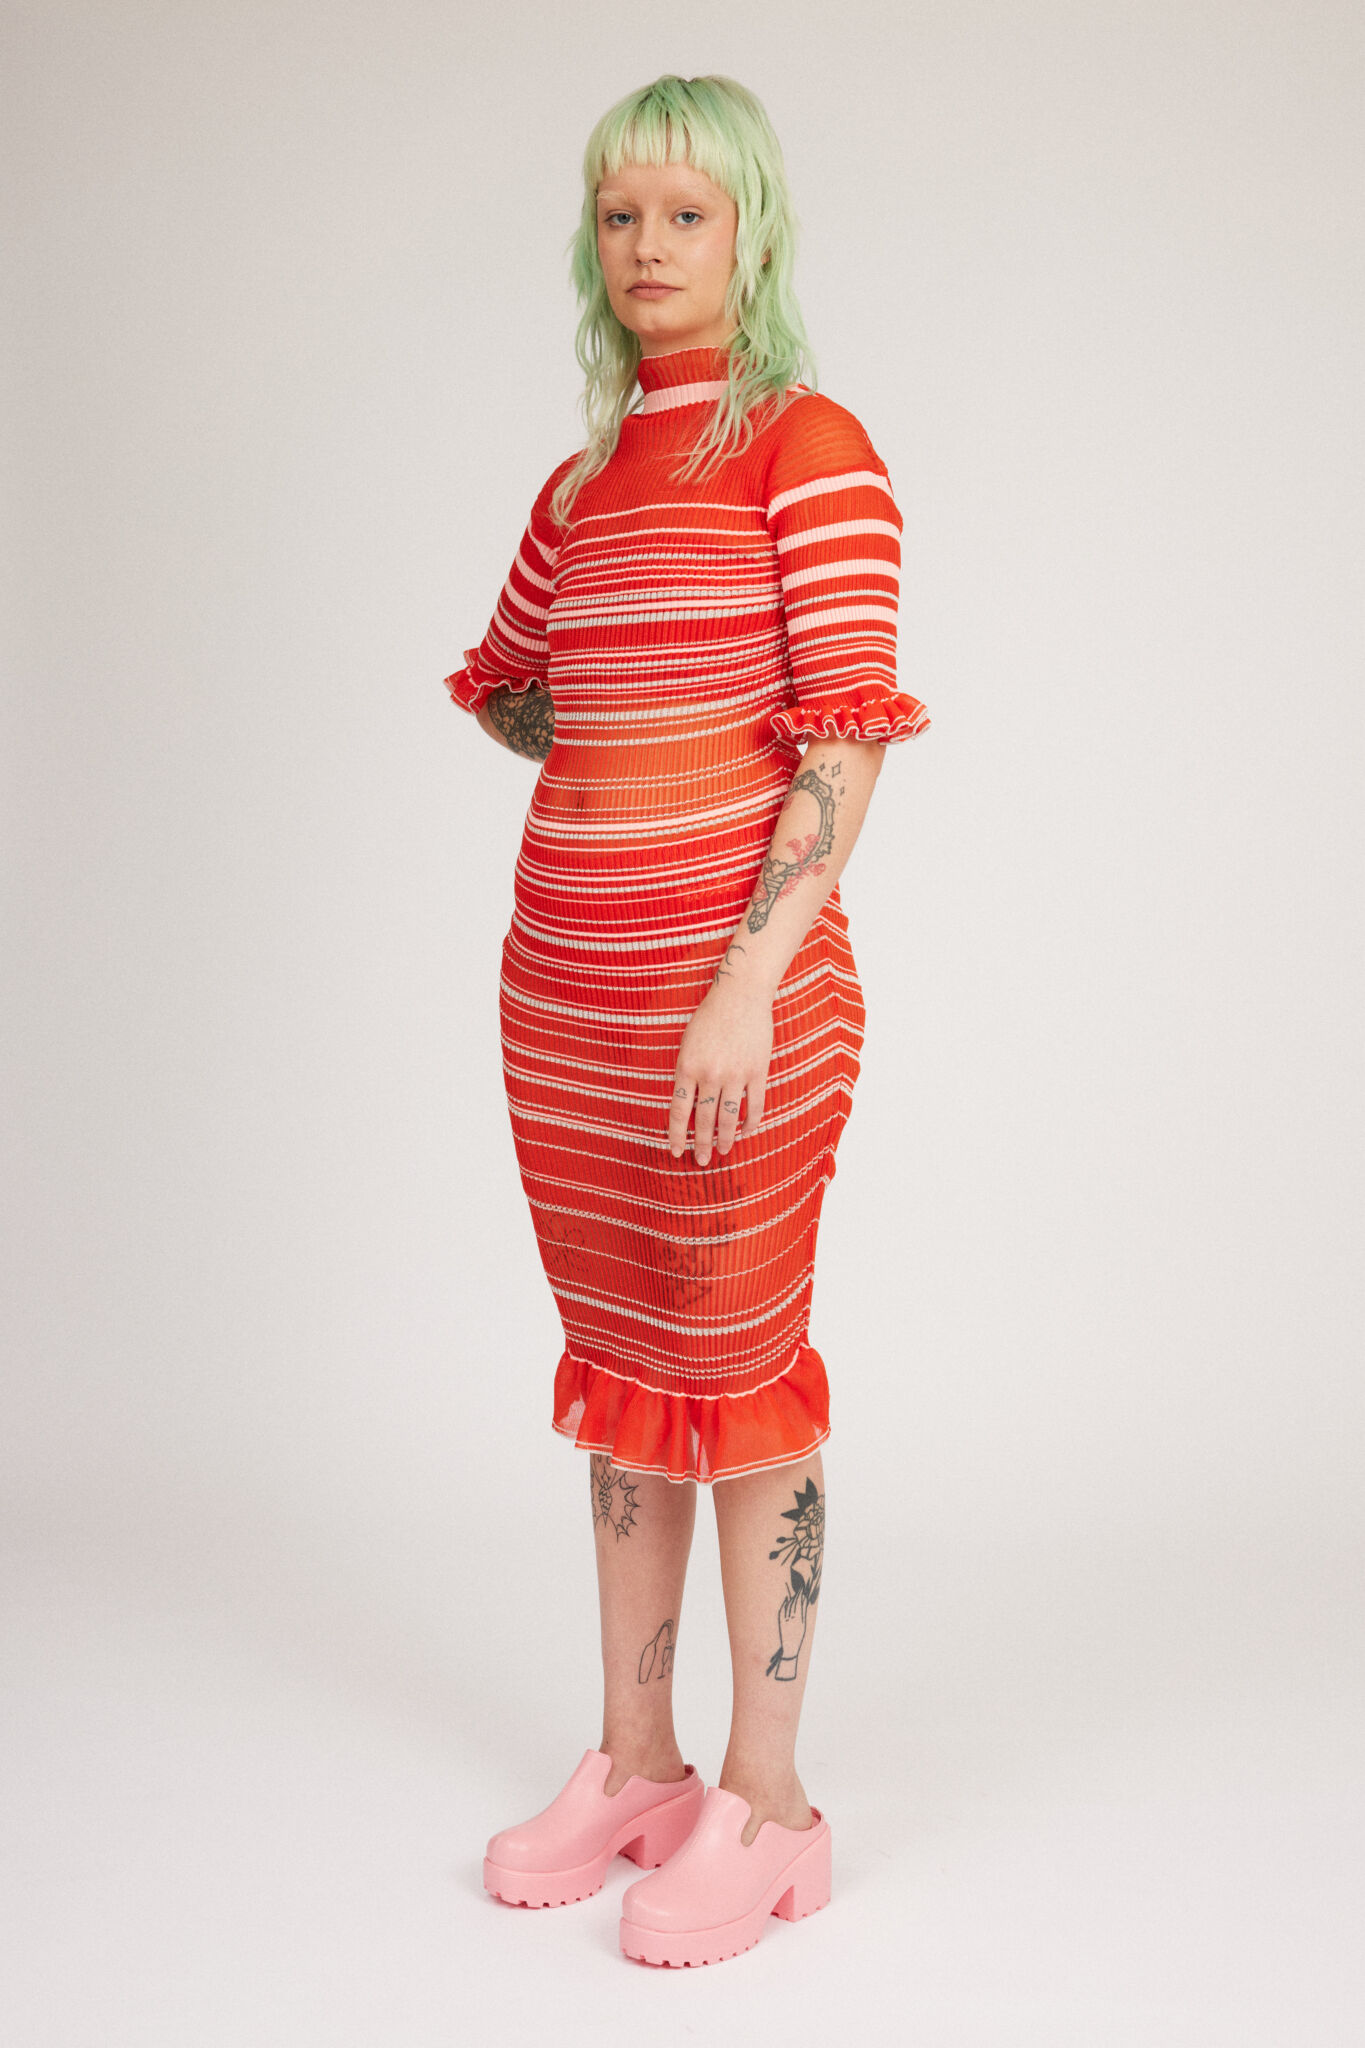 Sweet Secret Dress in coral red is a transparent knitted short sleeved high neck dress in gradient stripes with shimmery metallized yarn. The textile is lightweight, delicate and very flexible. The dress has a body fitted silhouette that adapts to the body. Detailed with frills and a logo in the back of neck.